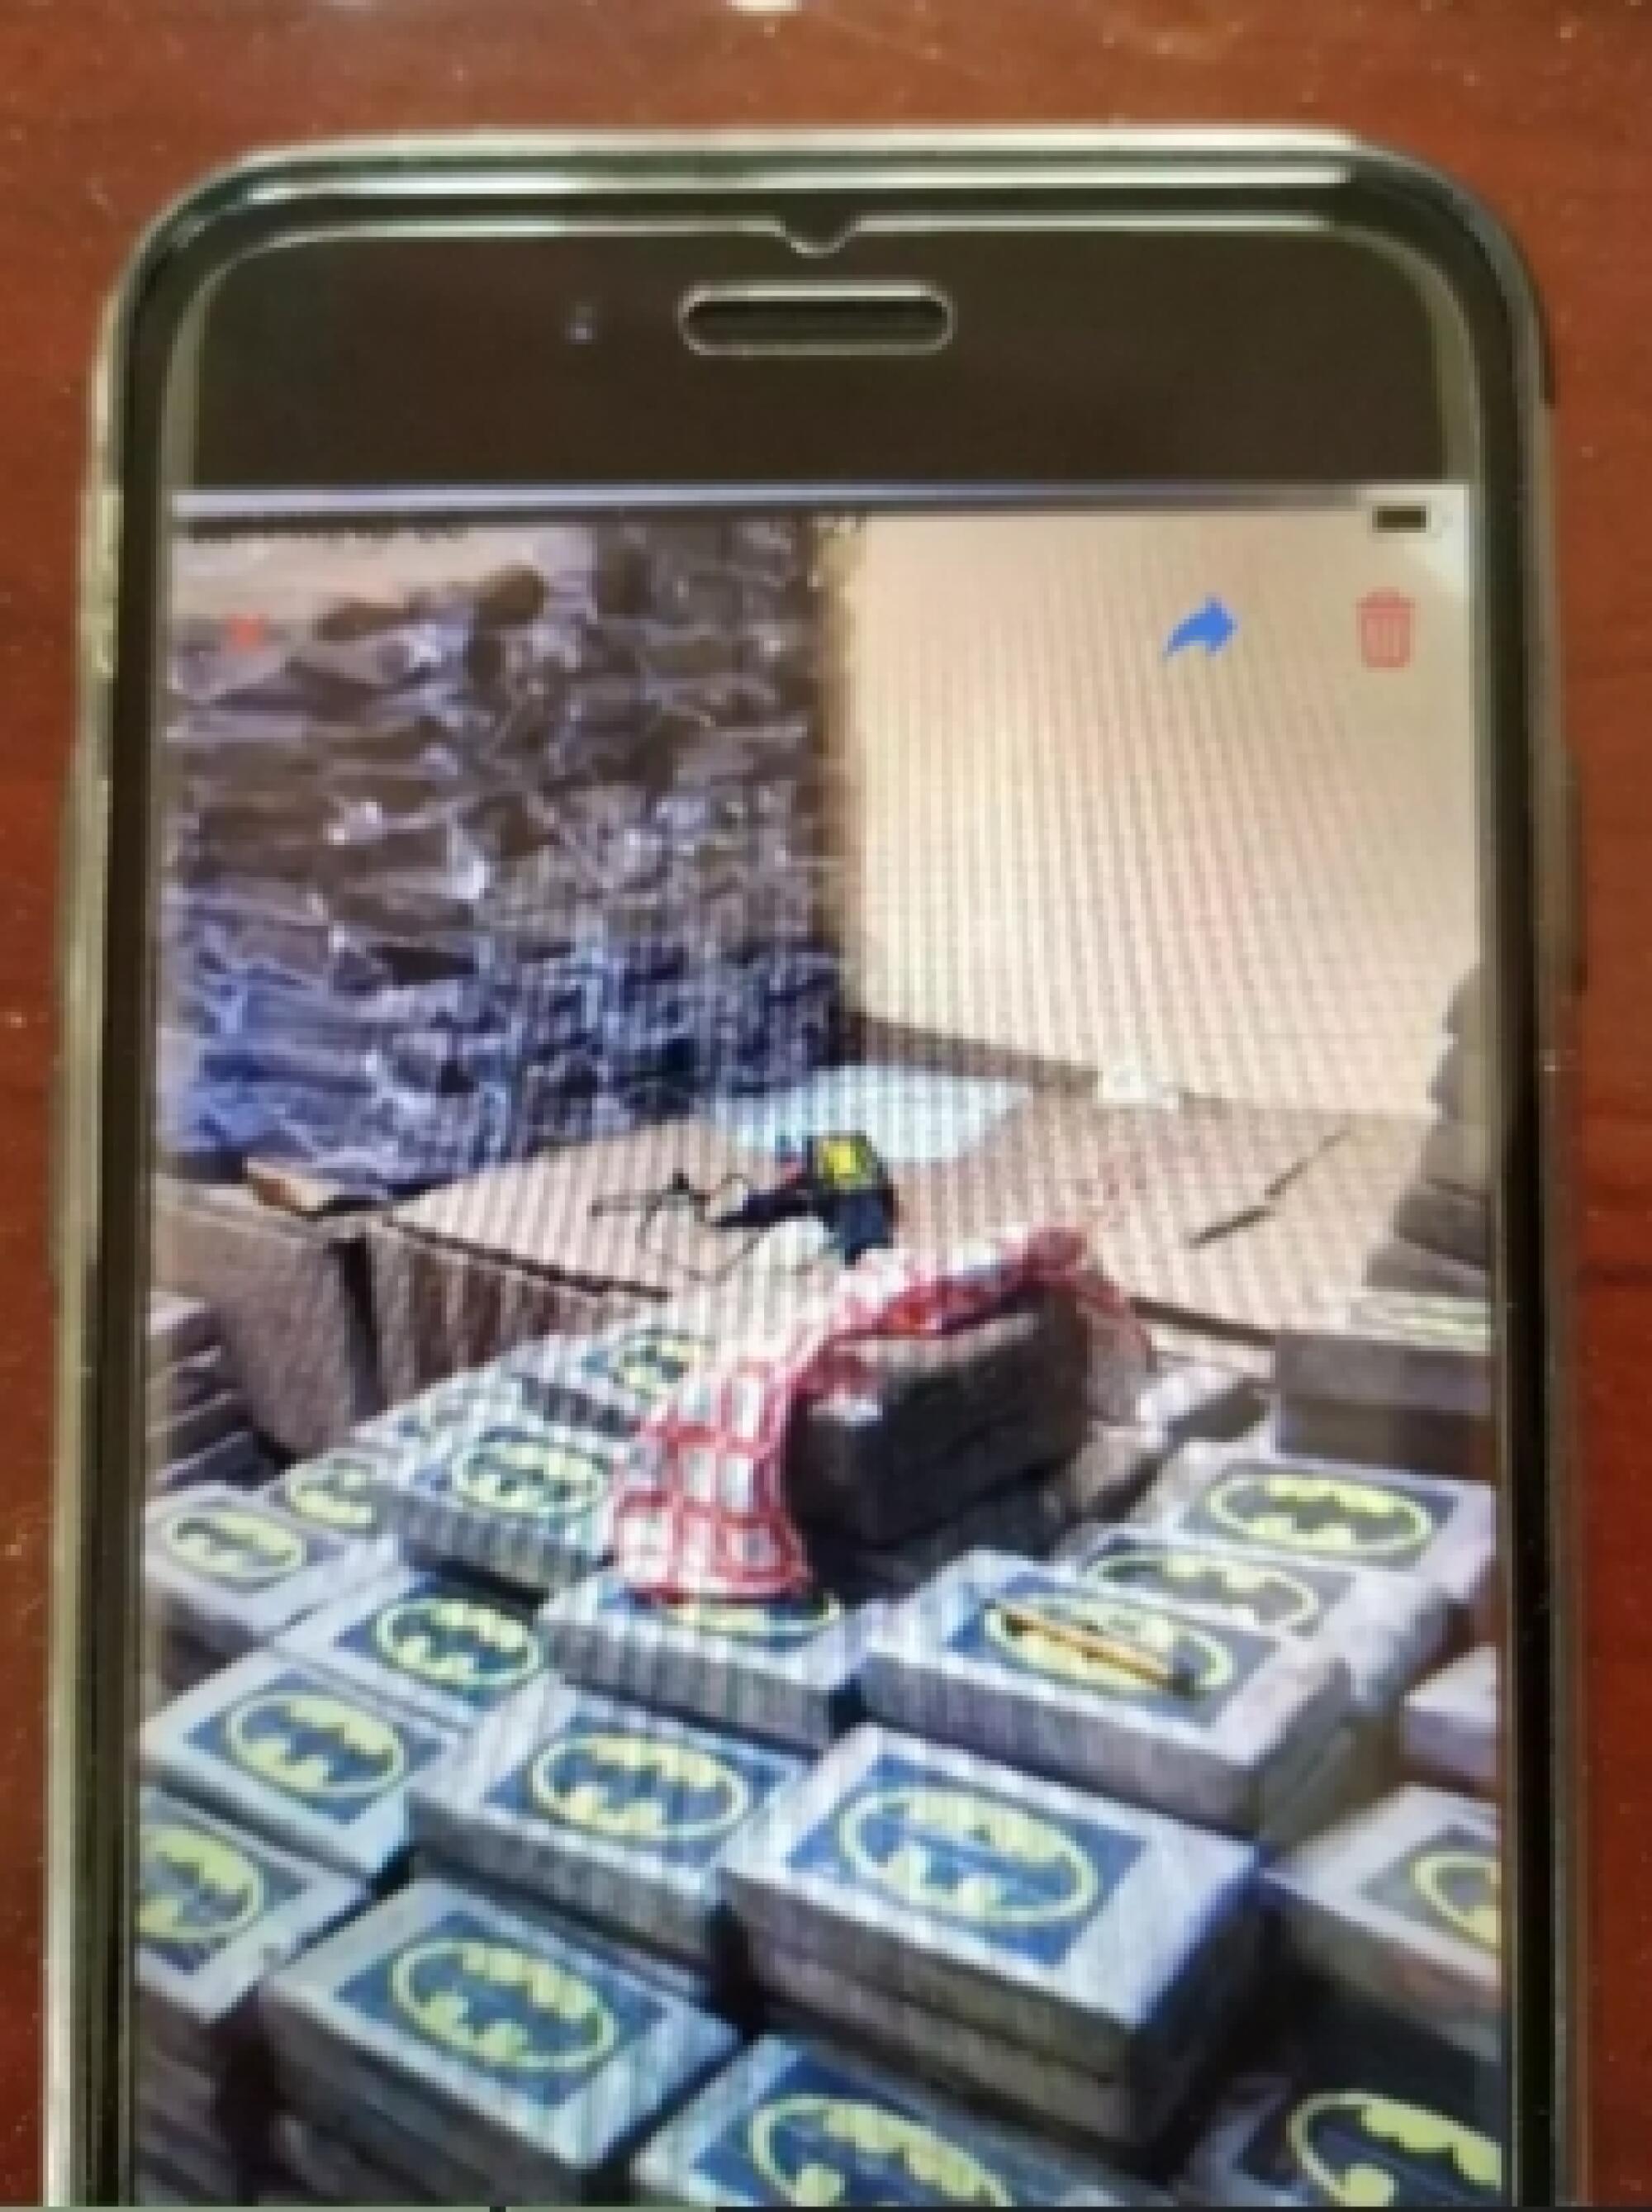 A photo of bricks of cocaine stamped with the Batman logo was sent from one Anom user to another in January 2020.